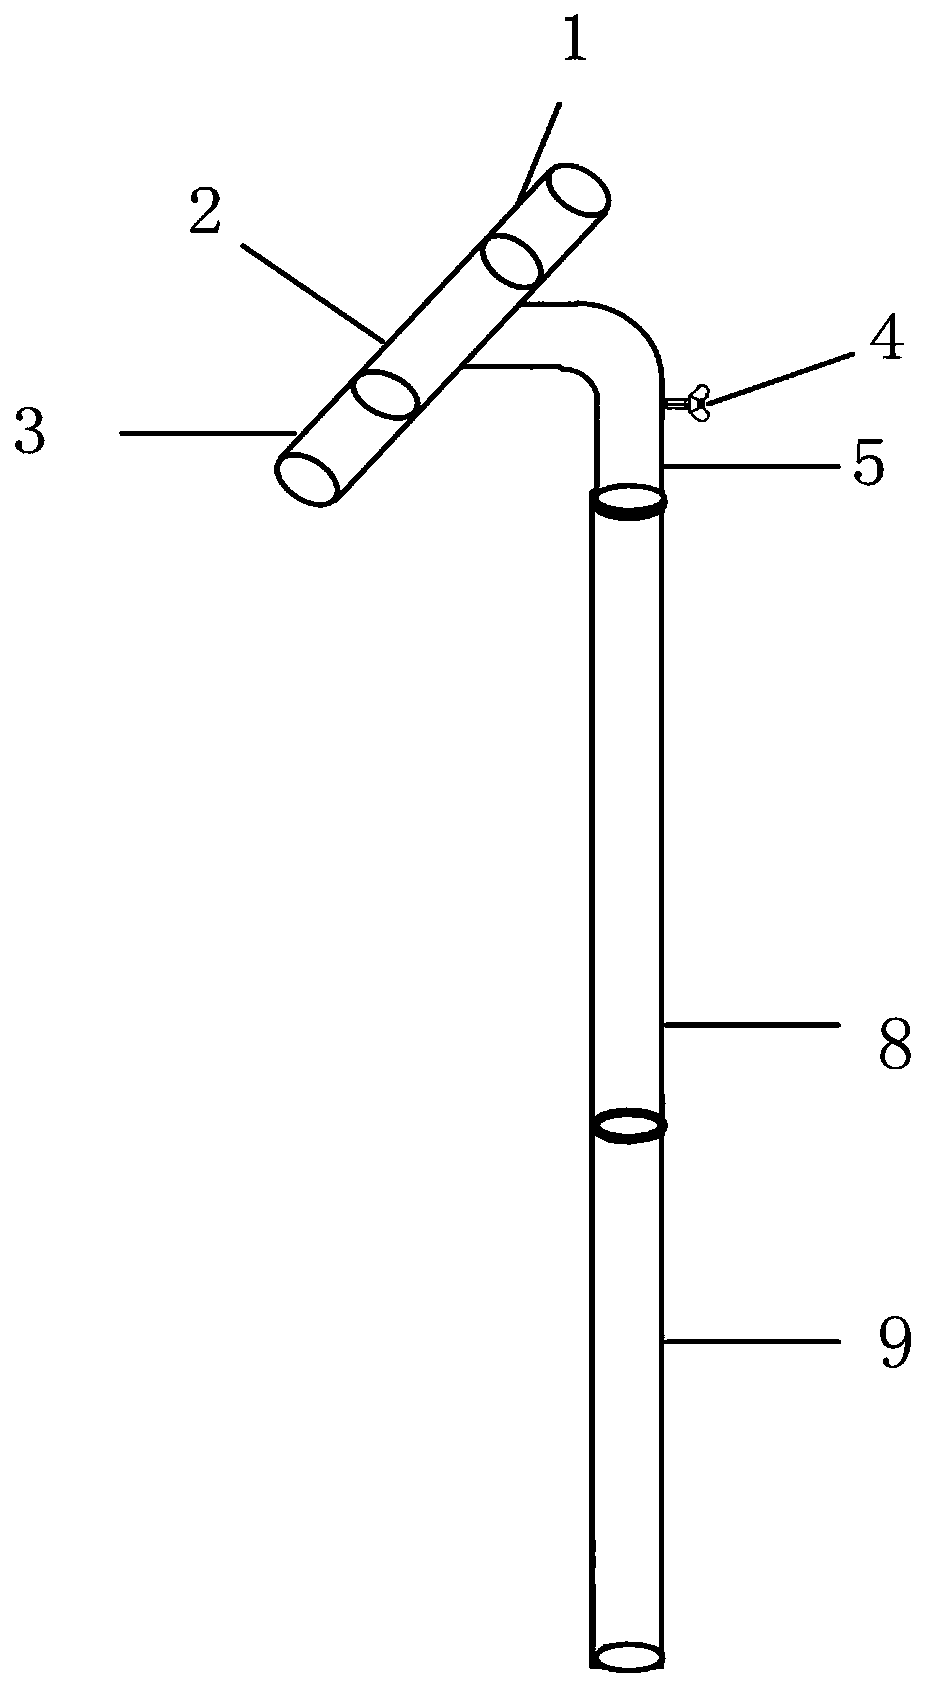 Novel test and operation wire hanging rod